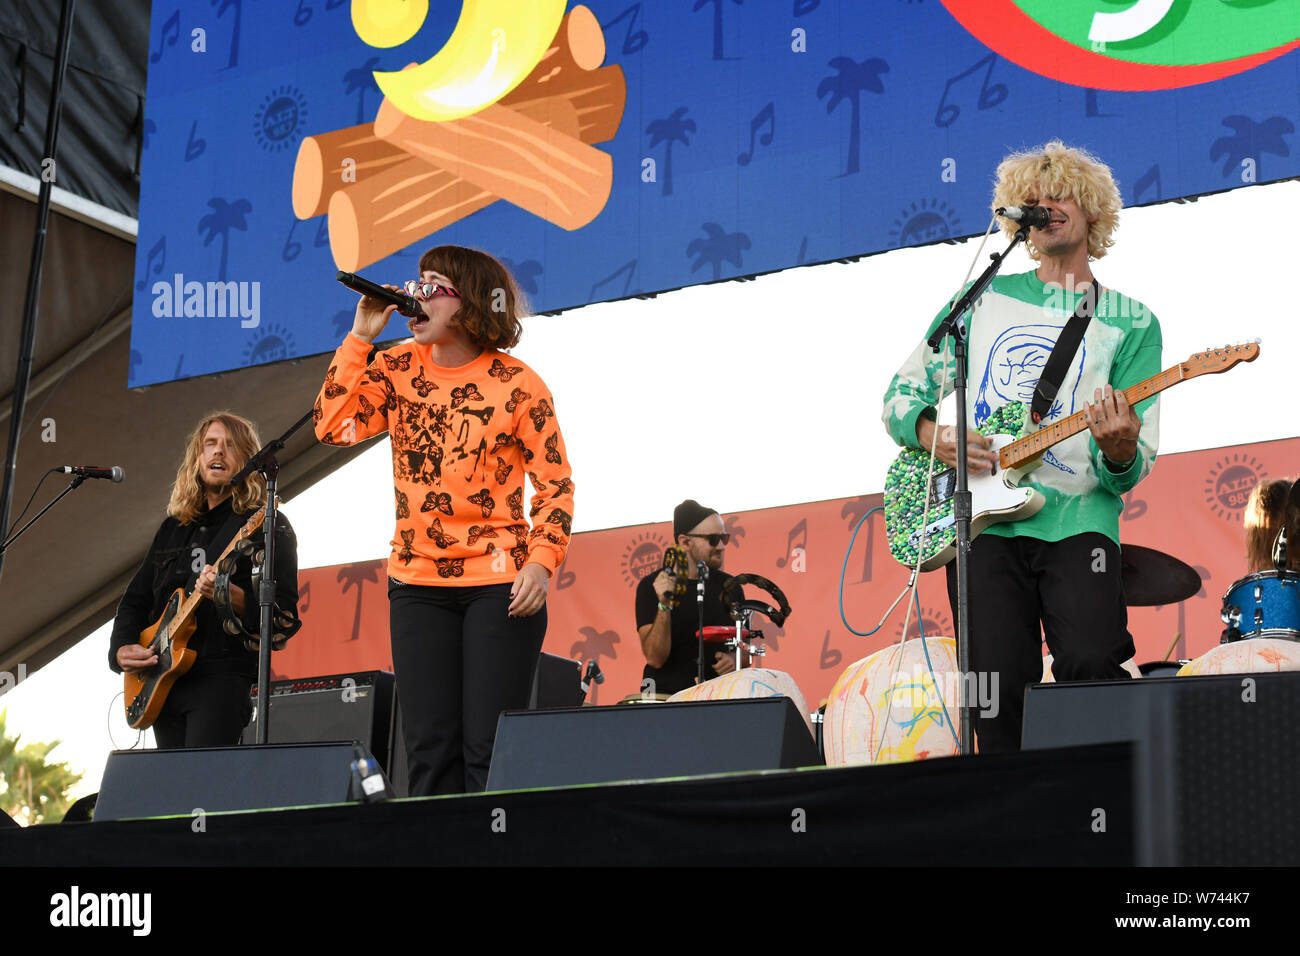 Long Beach, California, USA. 3rd Aug 2019. Hannah Hooper and Christian Zucconi of the band Grouplove performs at ALT 98.7 Summer Camp at the Queen Mary in Long Beach on August 3, 2019. Credit: The Photo Access/Alamy Live News Stock Photo